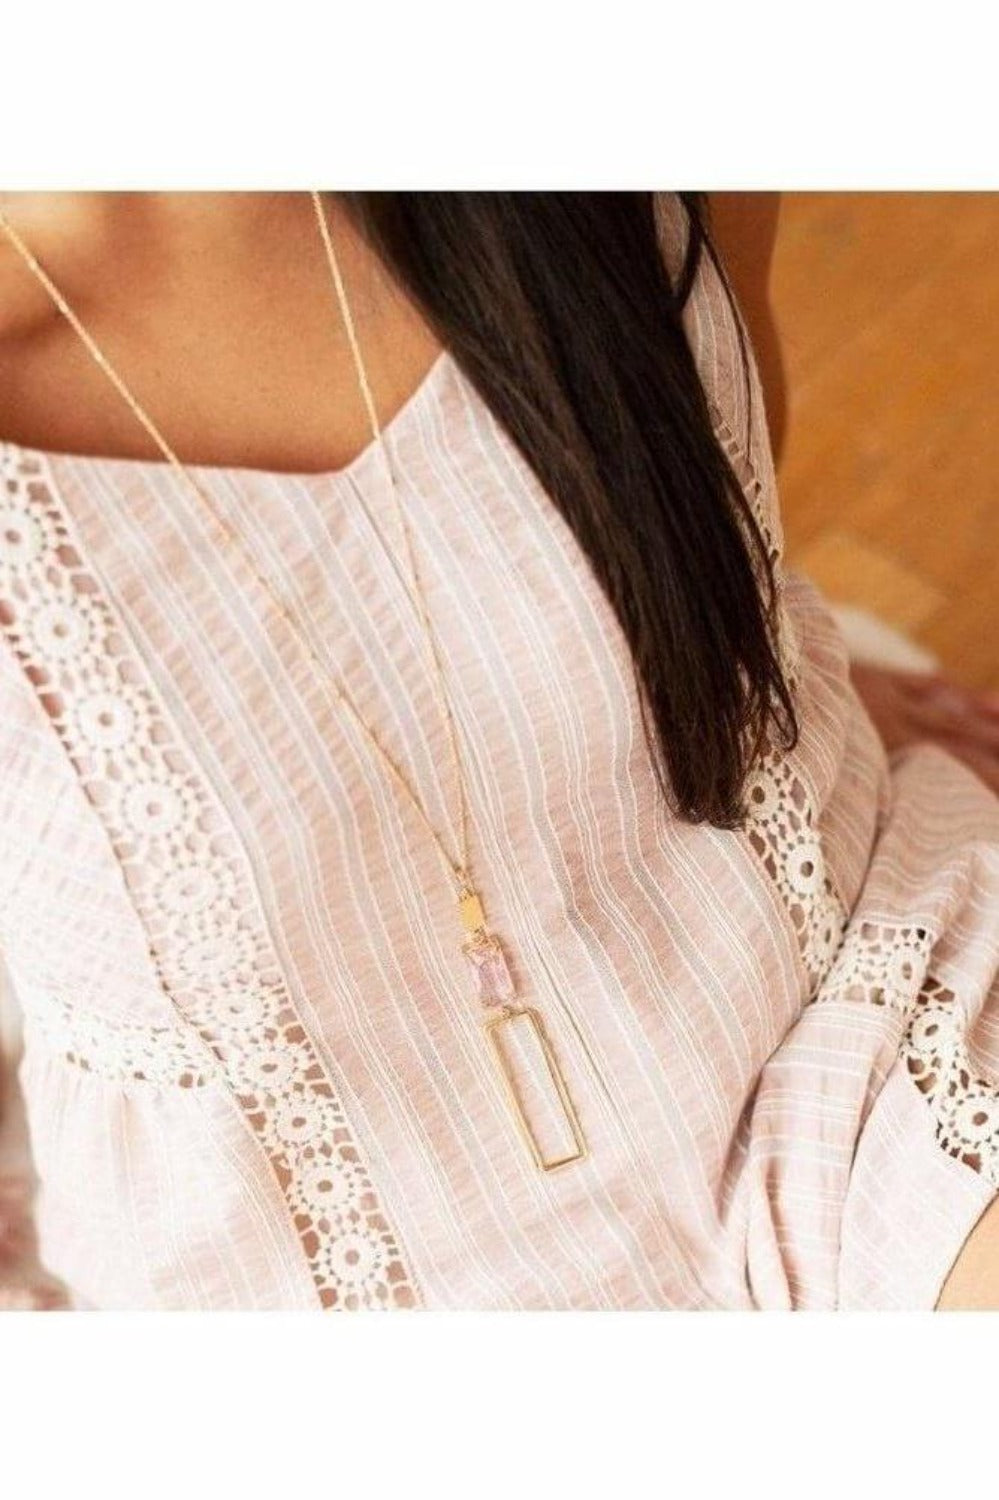 Pink and Gold Long Chain Necklace - Lolo Viv Boutique